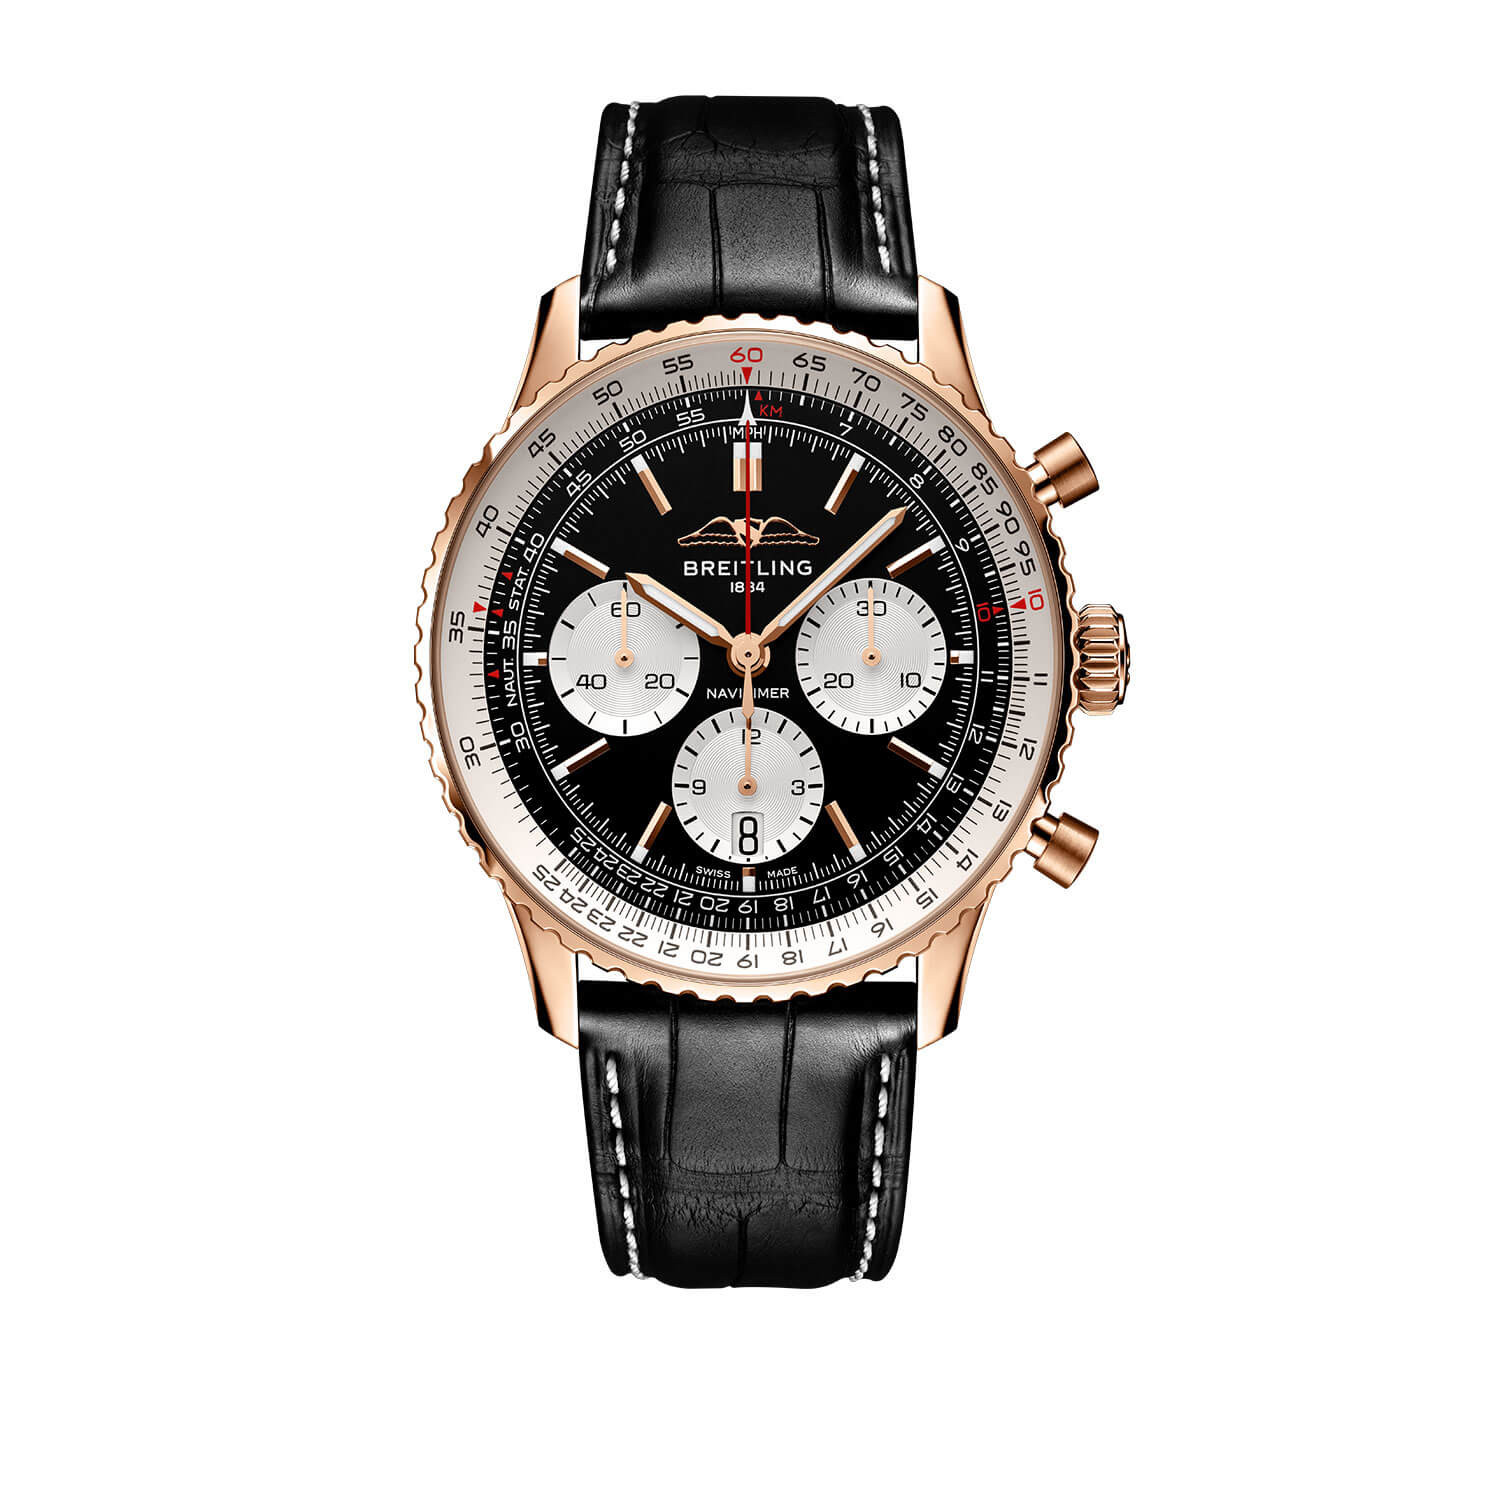 Breitling Navitimer B01 Chronograph Watch 18k Red Gold Case Black Dial Black Leather Strap, 43mm